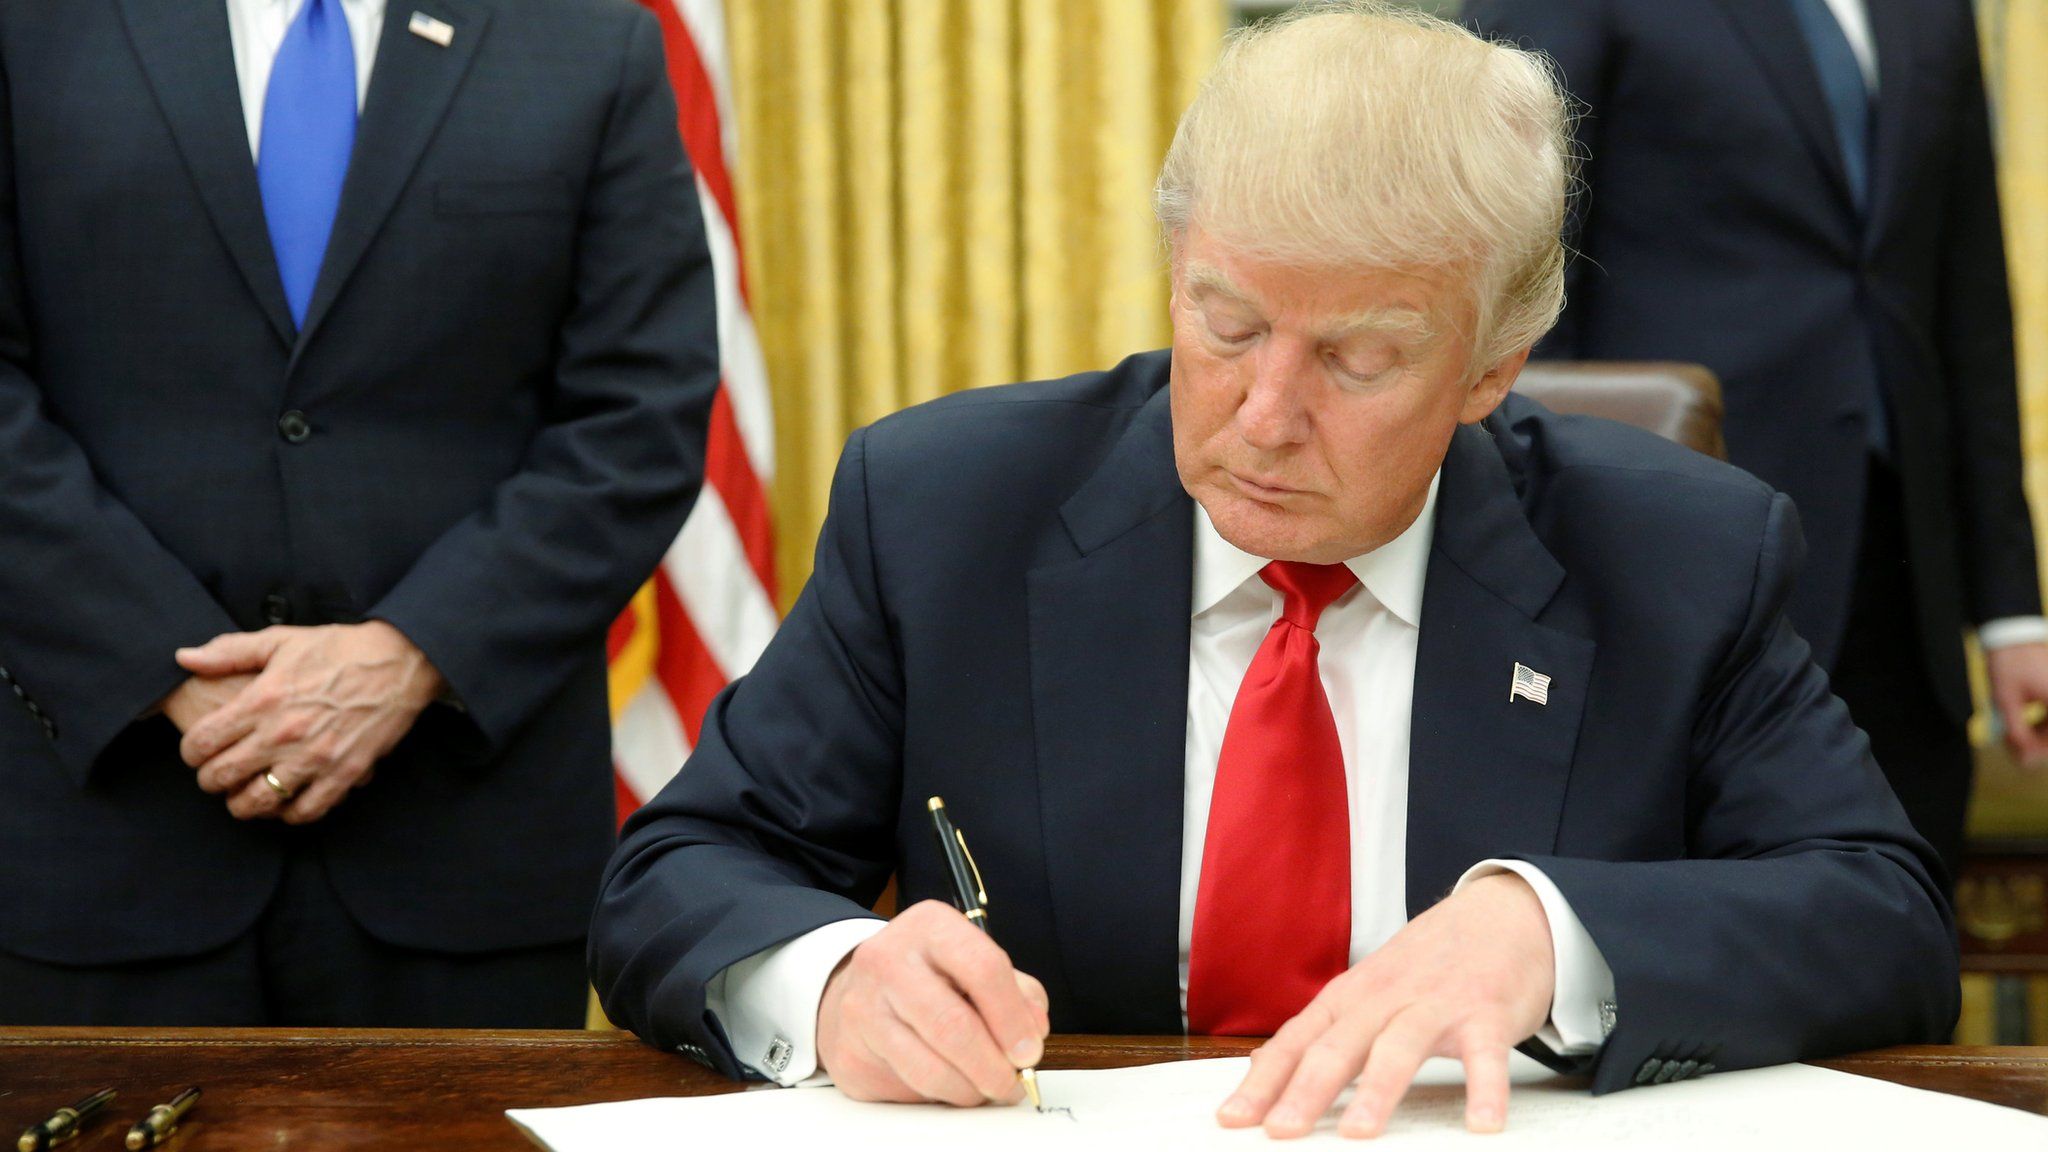 President Donald Trump signs first executive orders in Oval Office in Washington, January 20, 2017